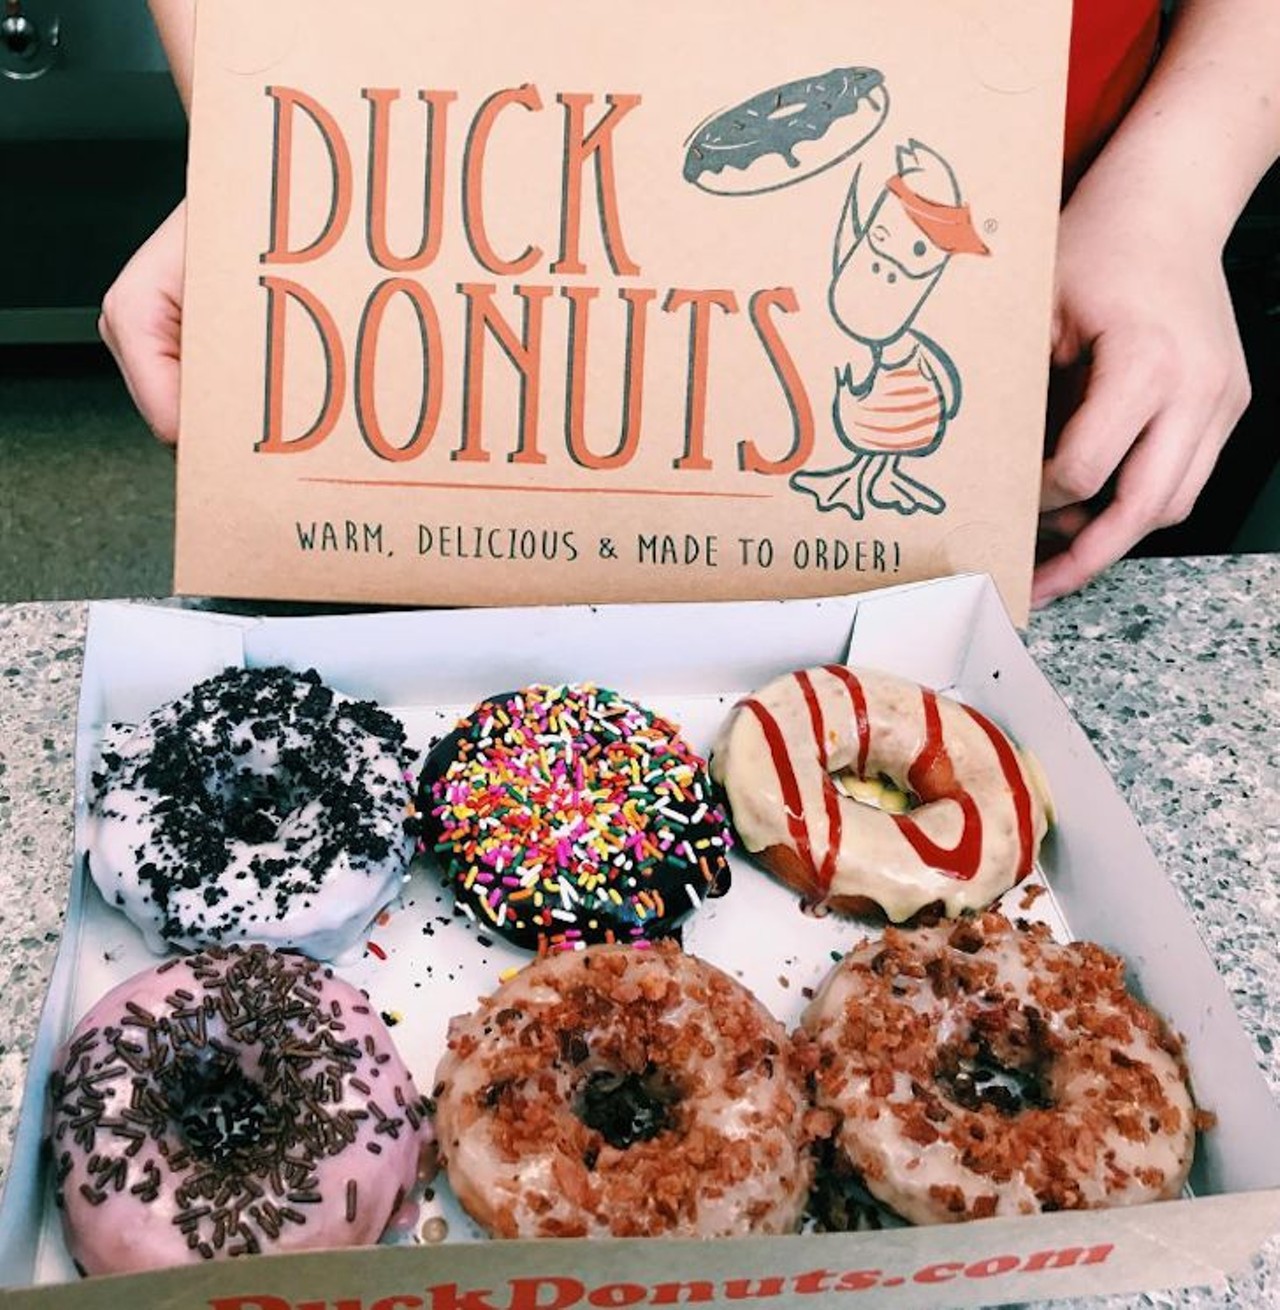 Duck Donuts 
Address: 710 Centerview Blvd., Kissimmee
Originally only available in North Carolina, Duck Donut&#146;s delicious recipe has come to Central Florida this summer. Your mouth will water just by looking at these doughnuts, and doughnut sundaes are sure to please those with an extra sweet tooth. 
Photo via watashiwaother